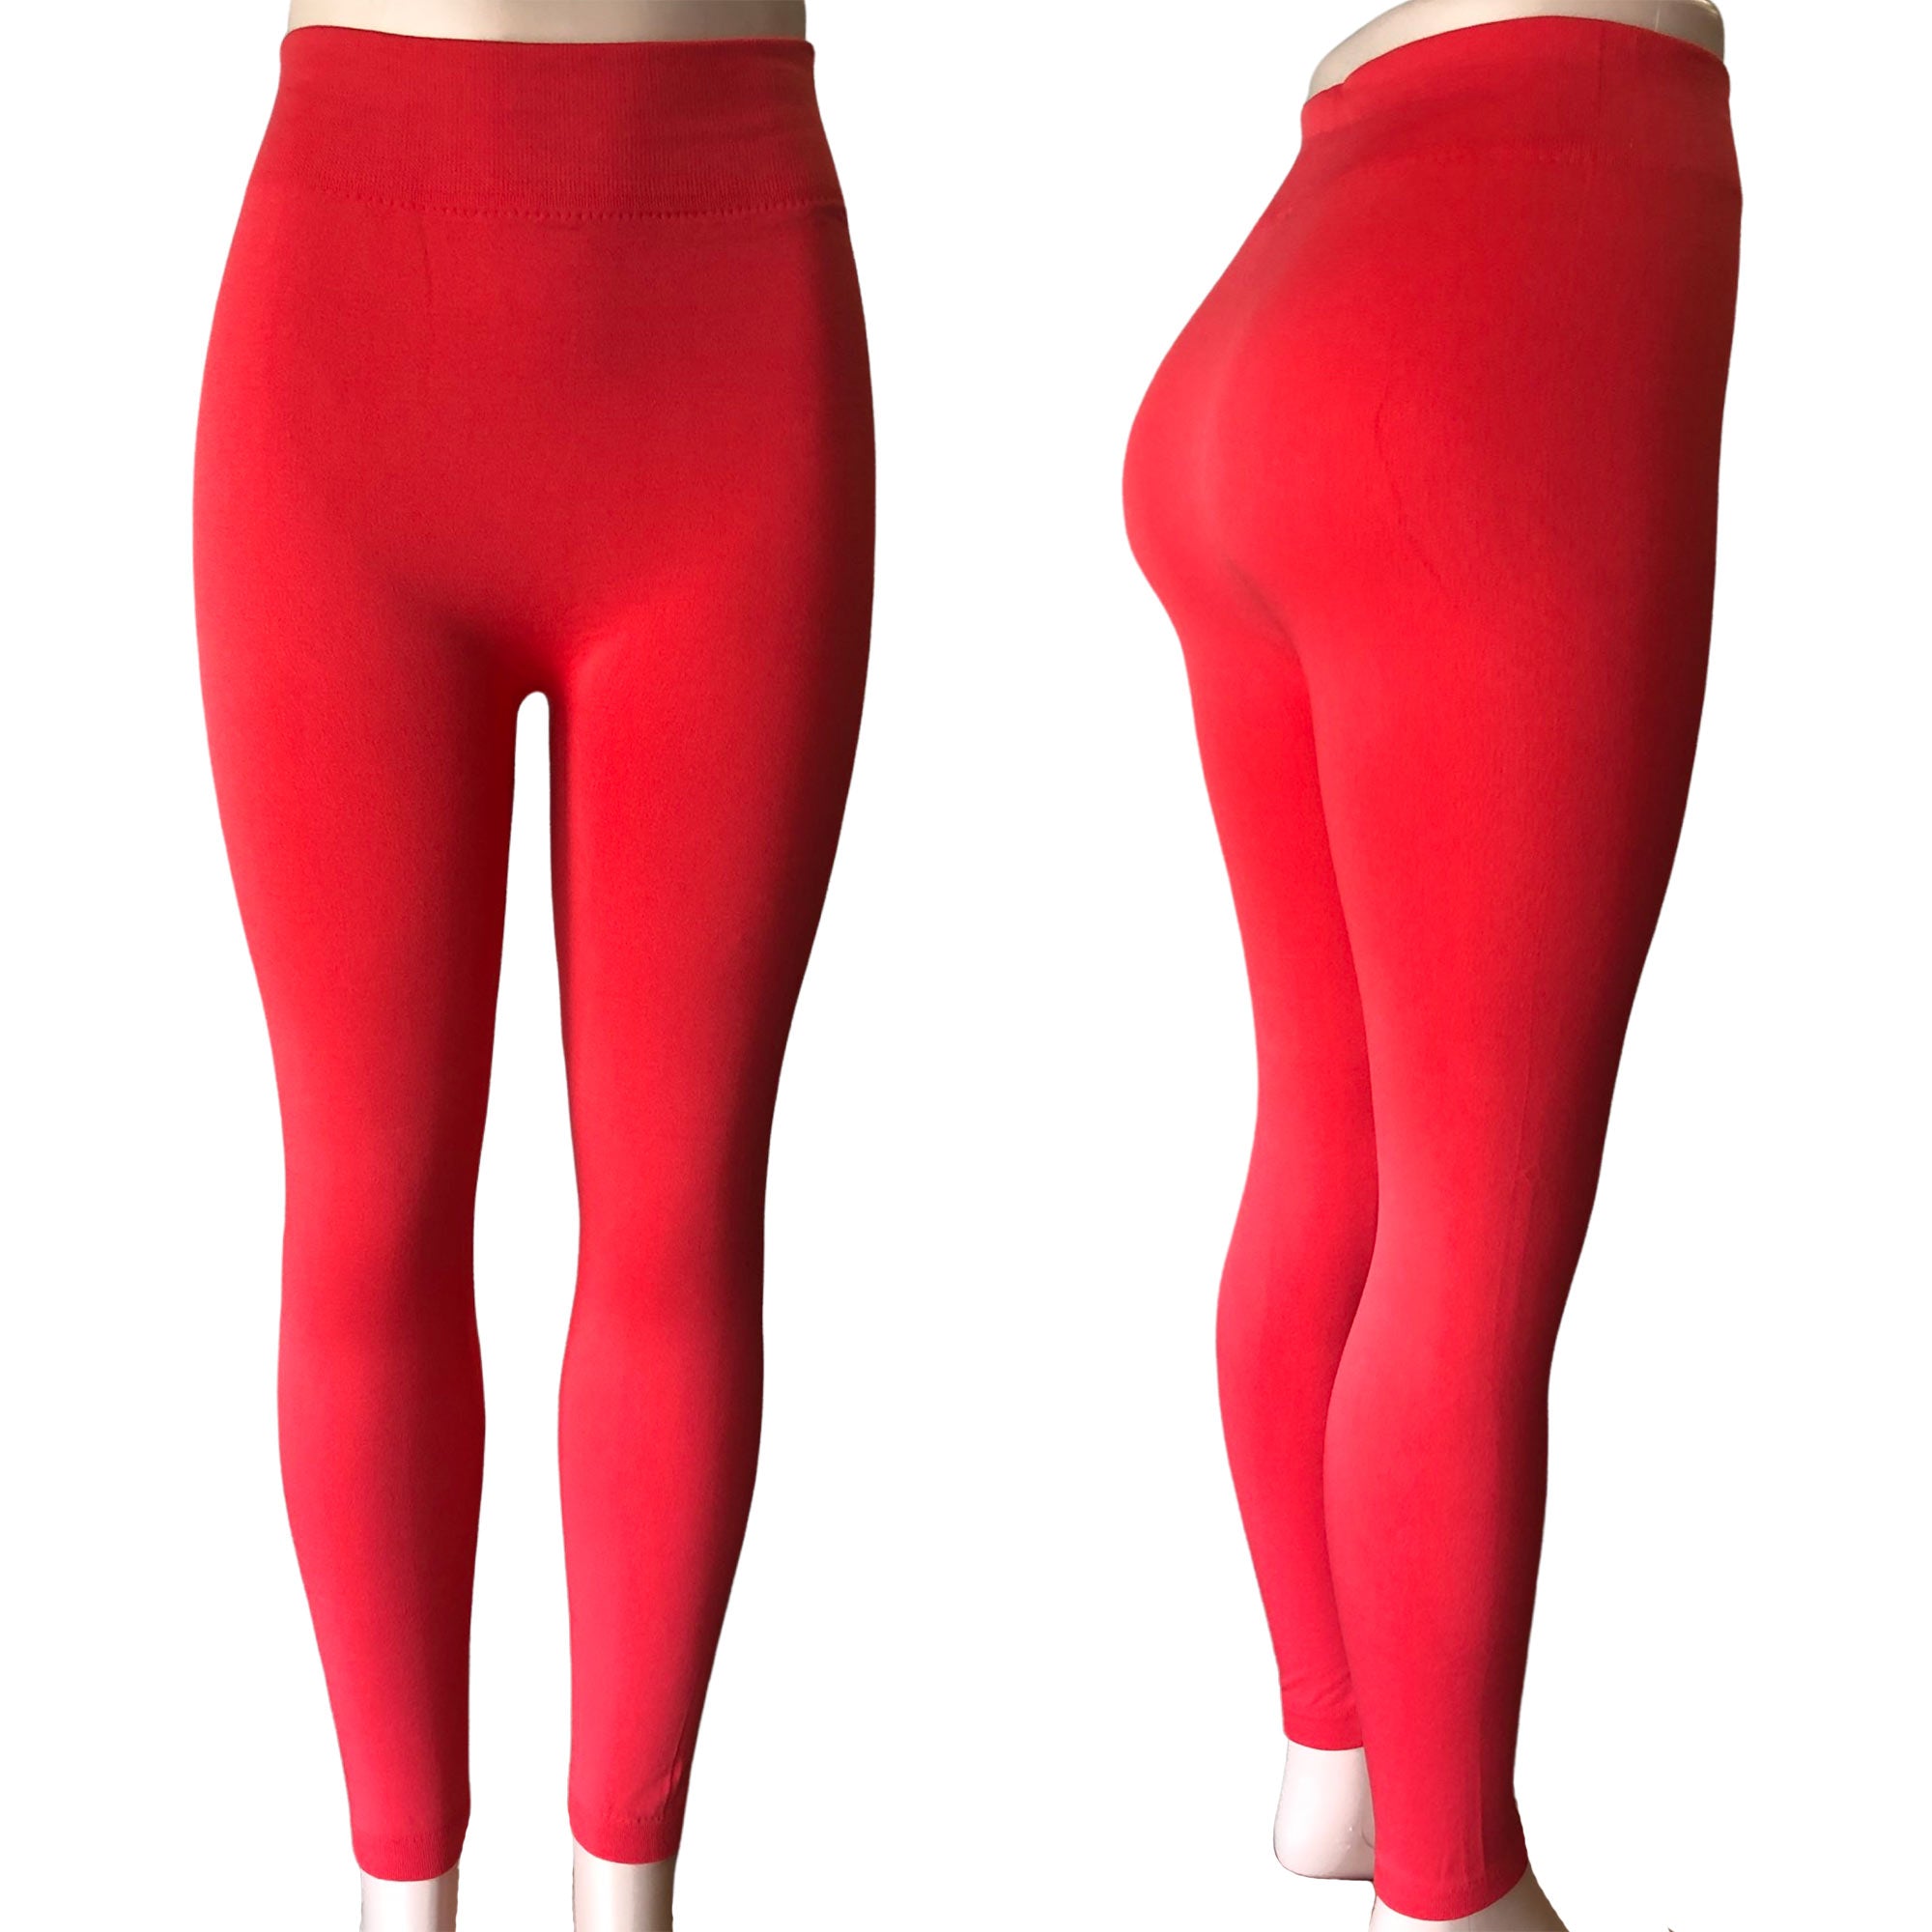 Clearance Apparel & Leggings, Discount Wholesale Accessories